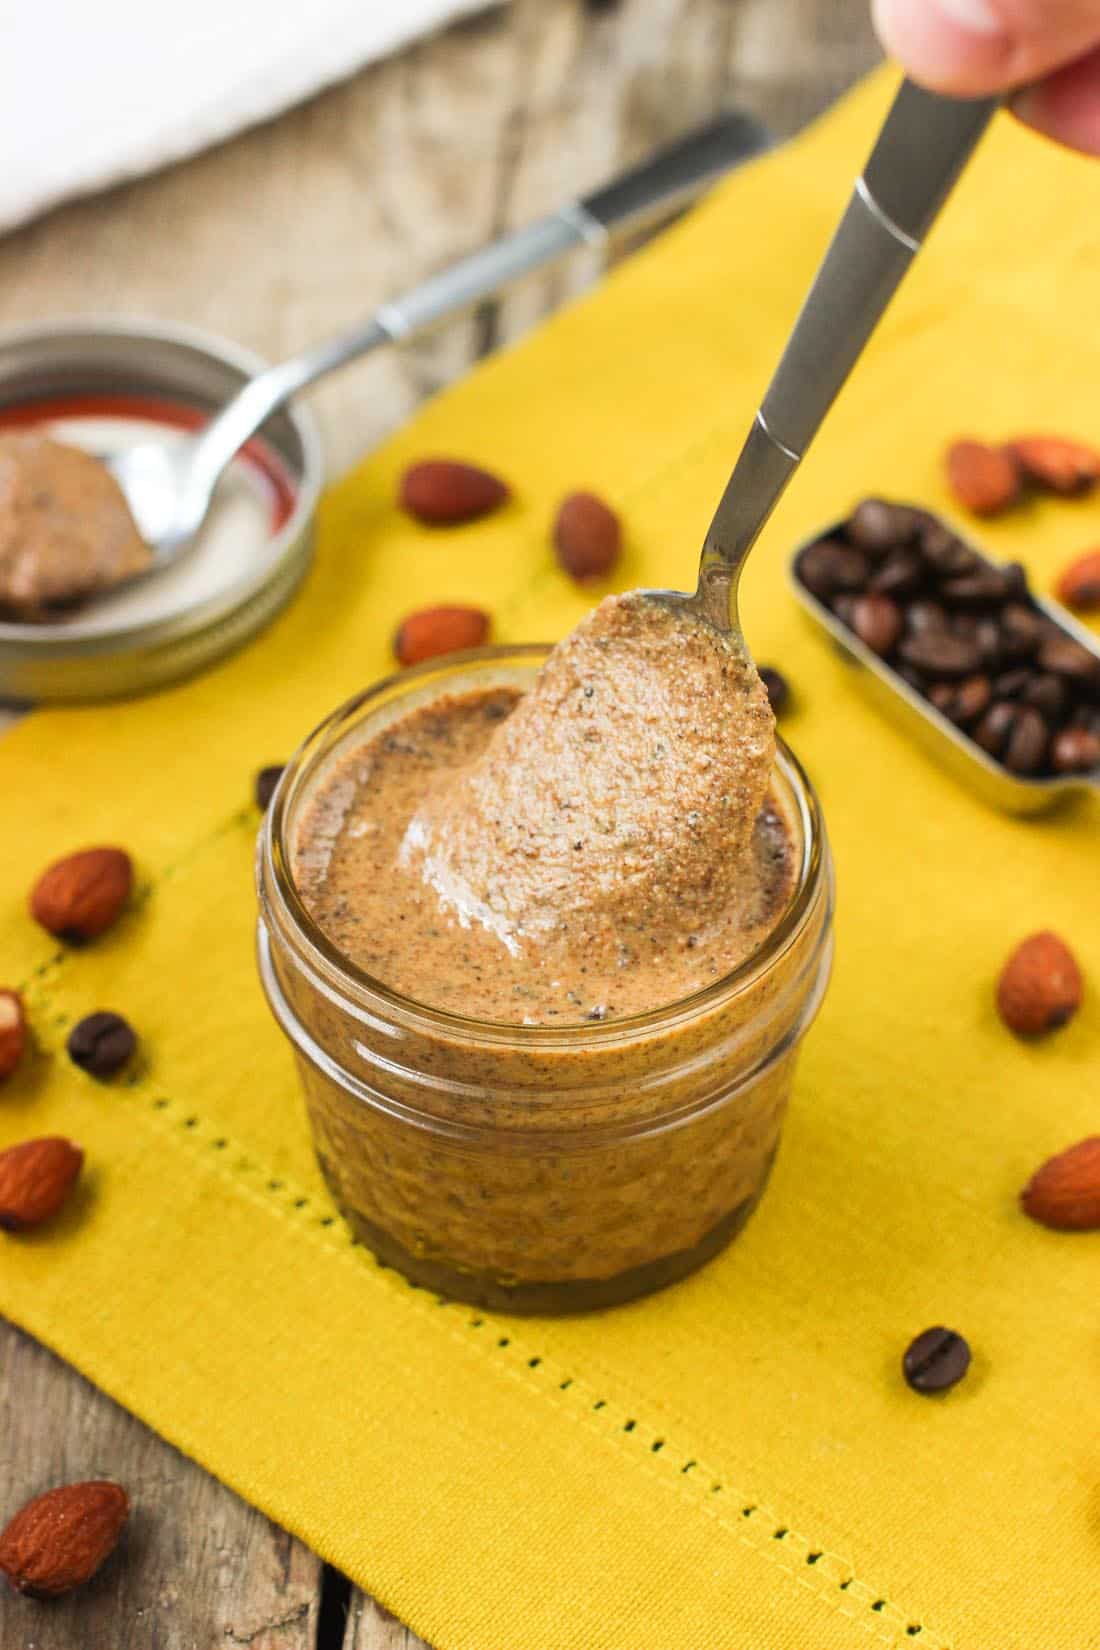 A spoonful of almond butter being lifted out of the glass jar